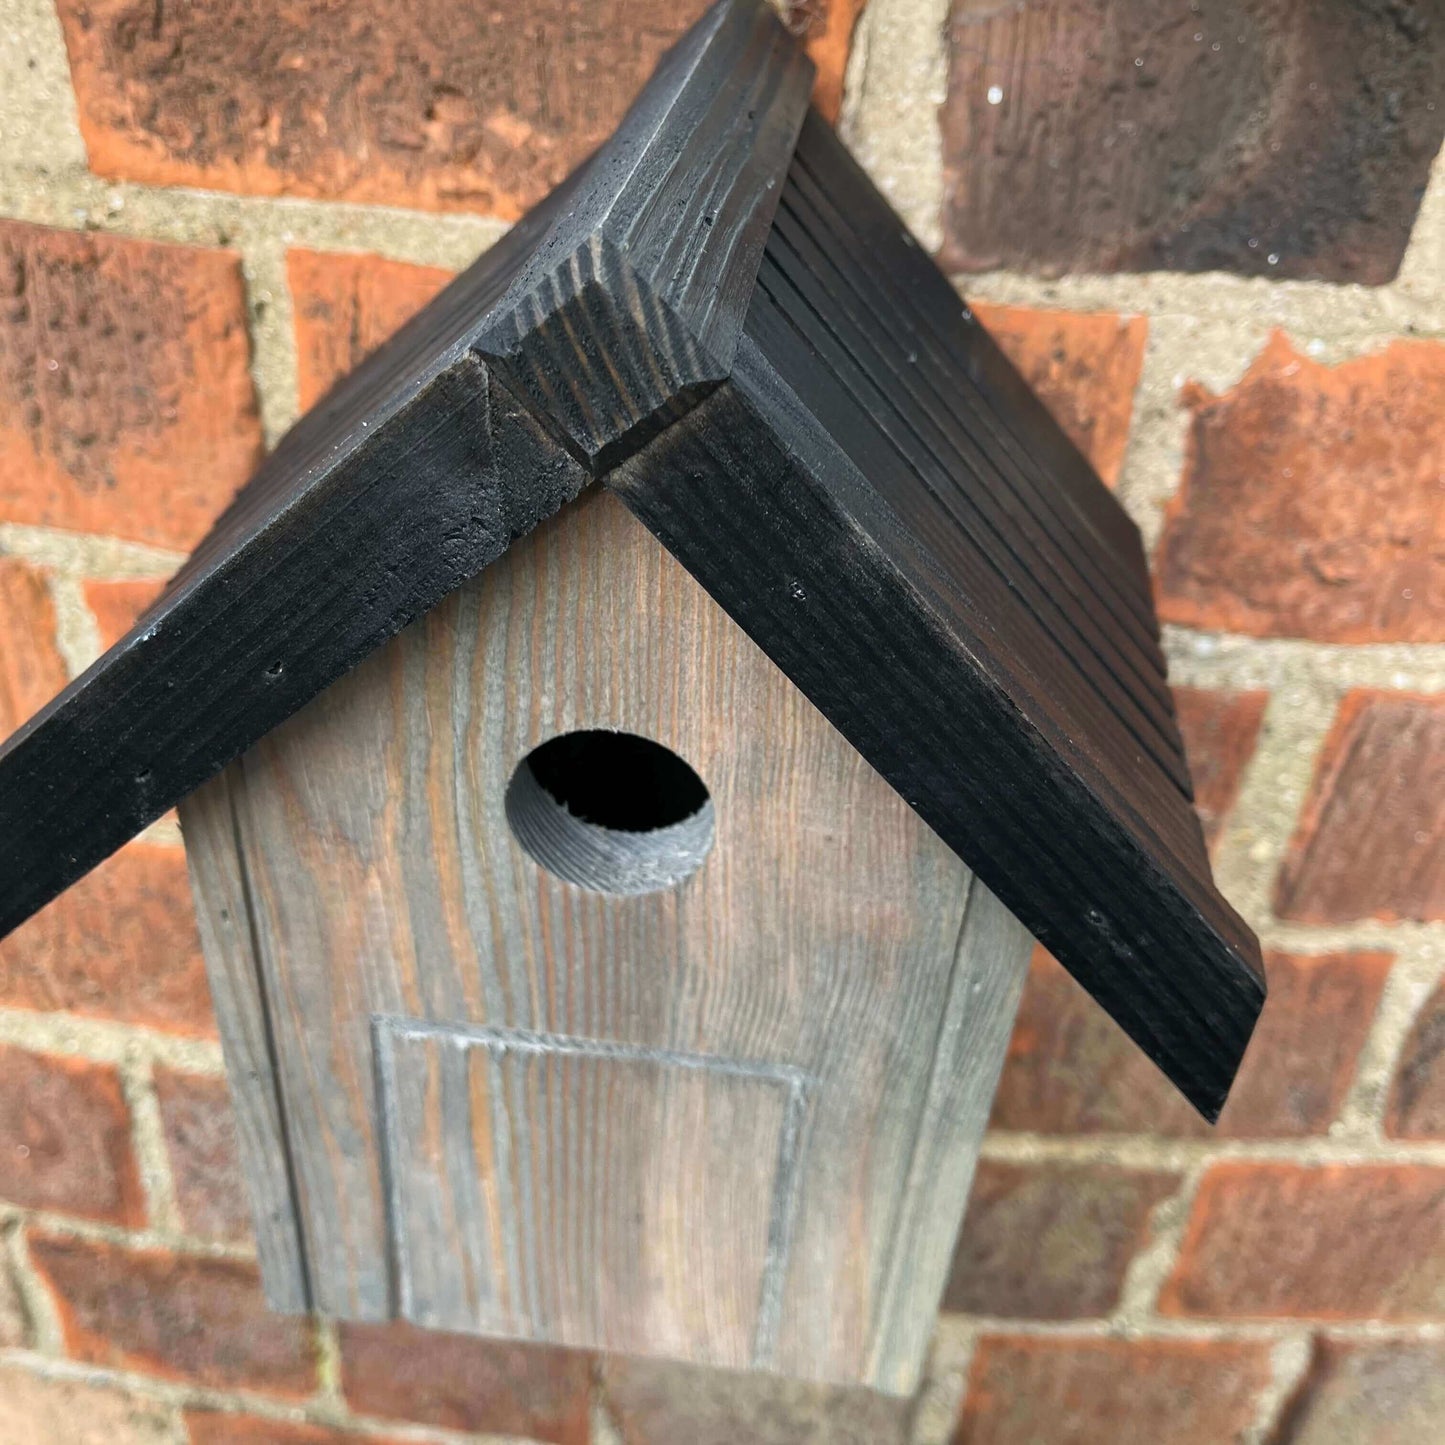 Nest box attached to a wall, ready for the breeding season.